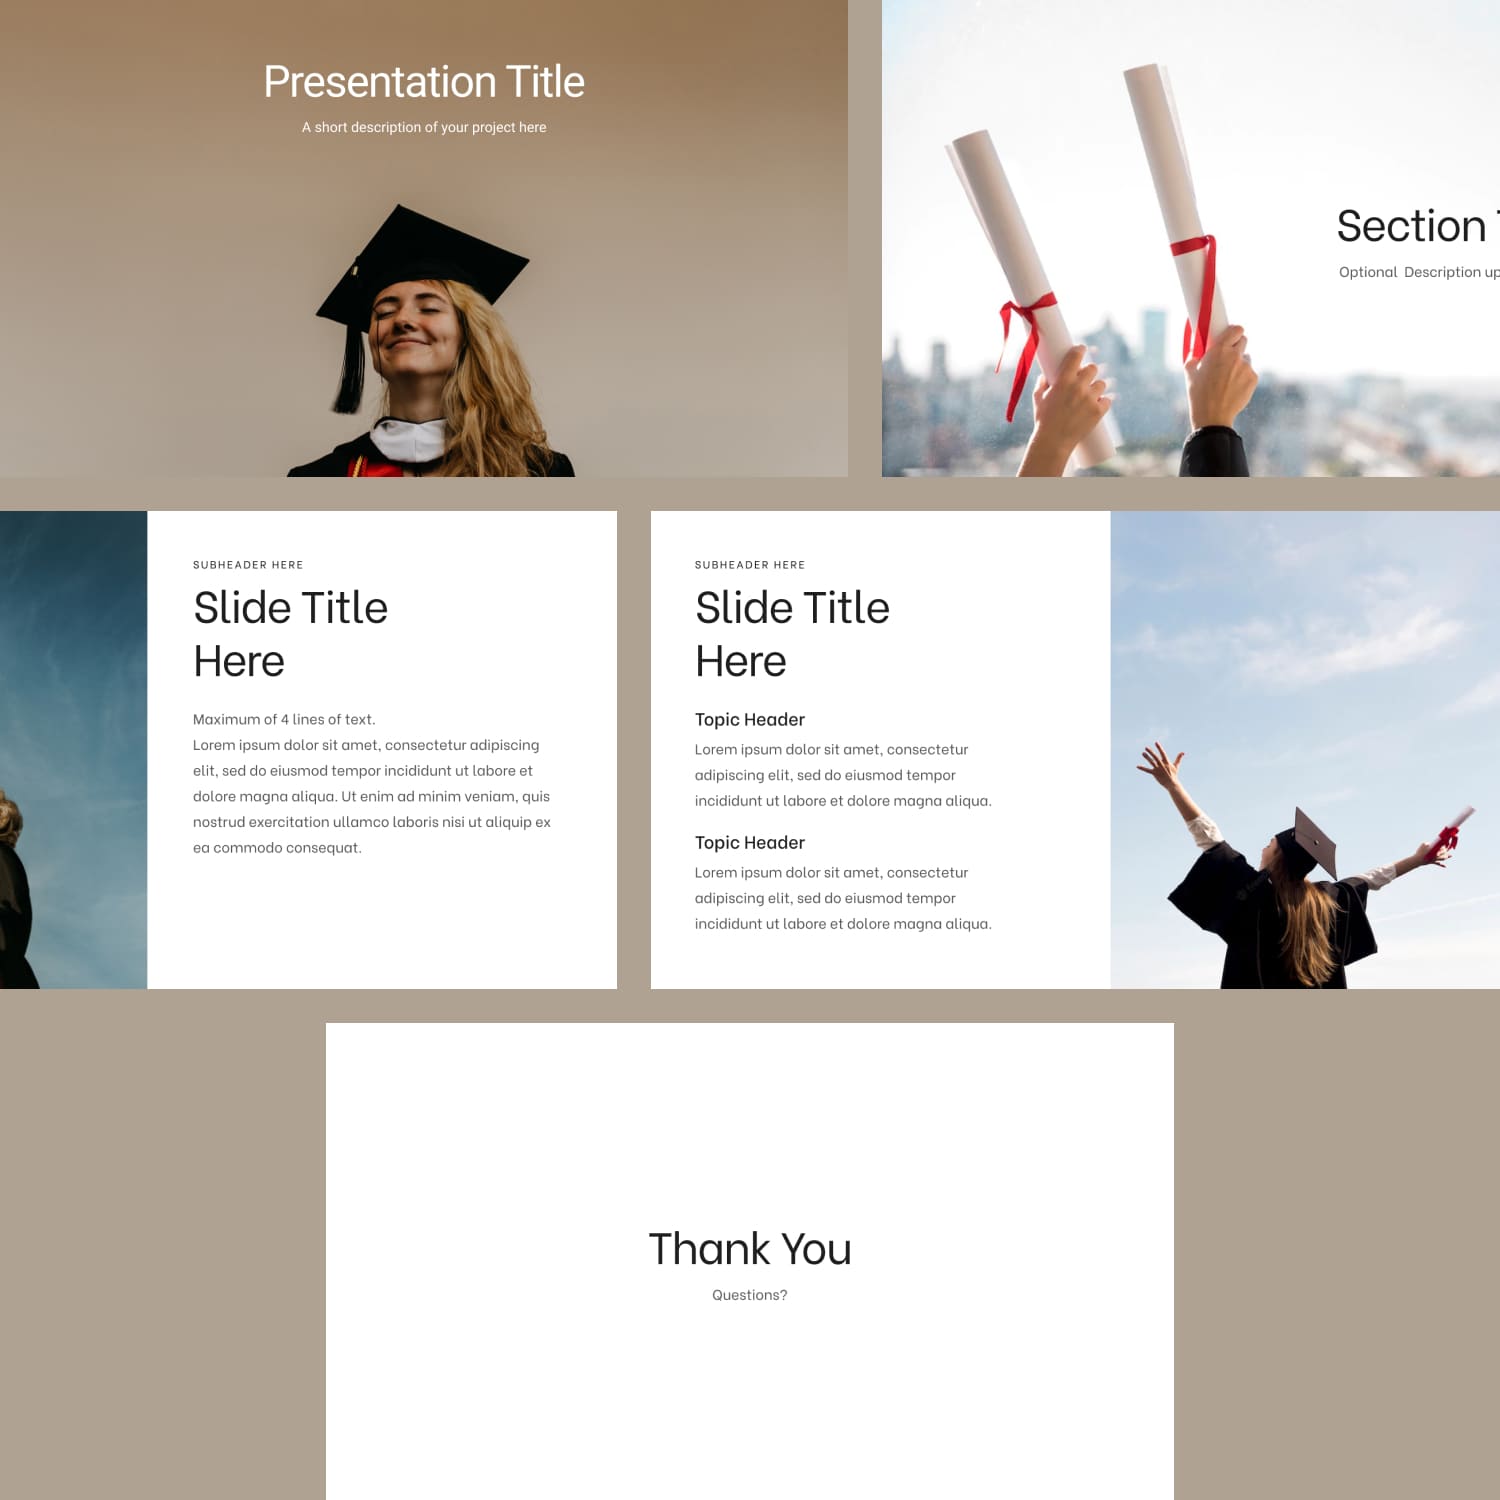 Preview Graduation Powerpoint Template Free.